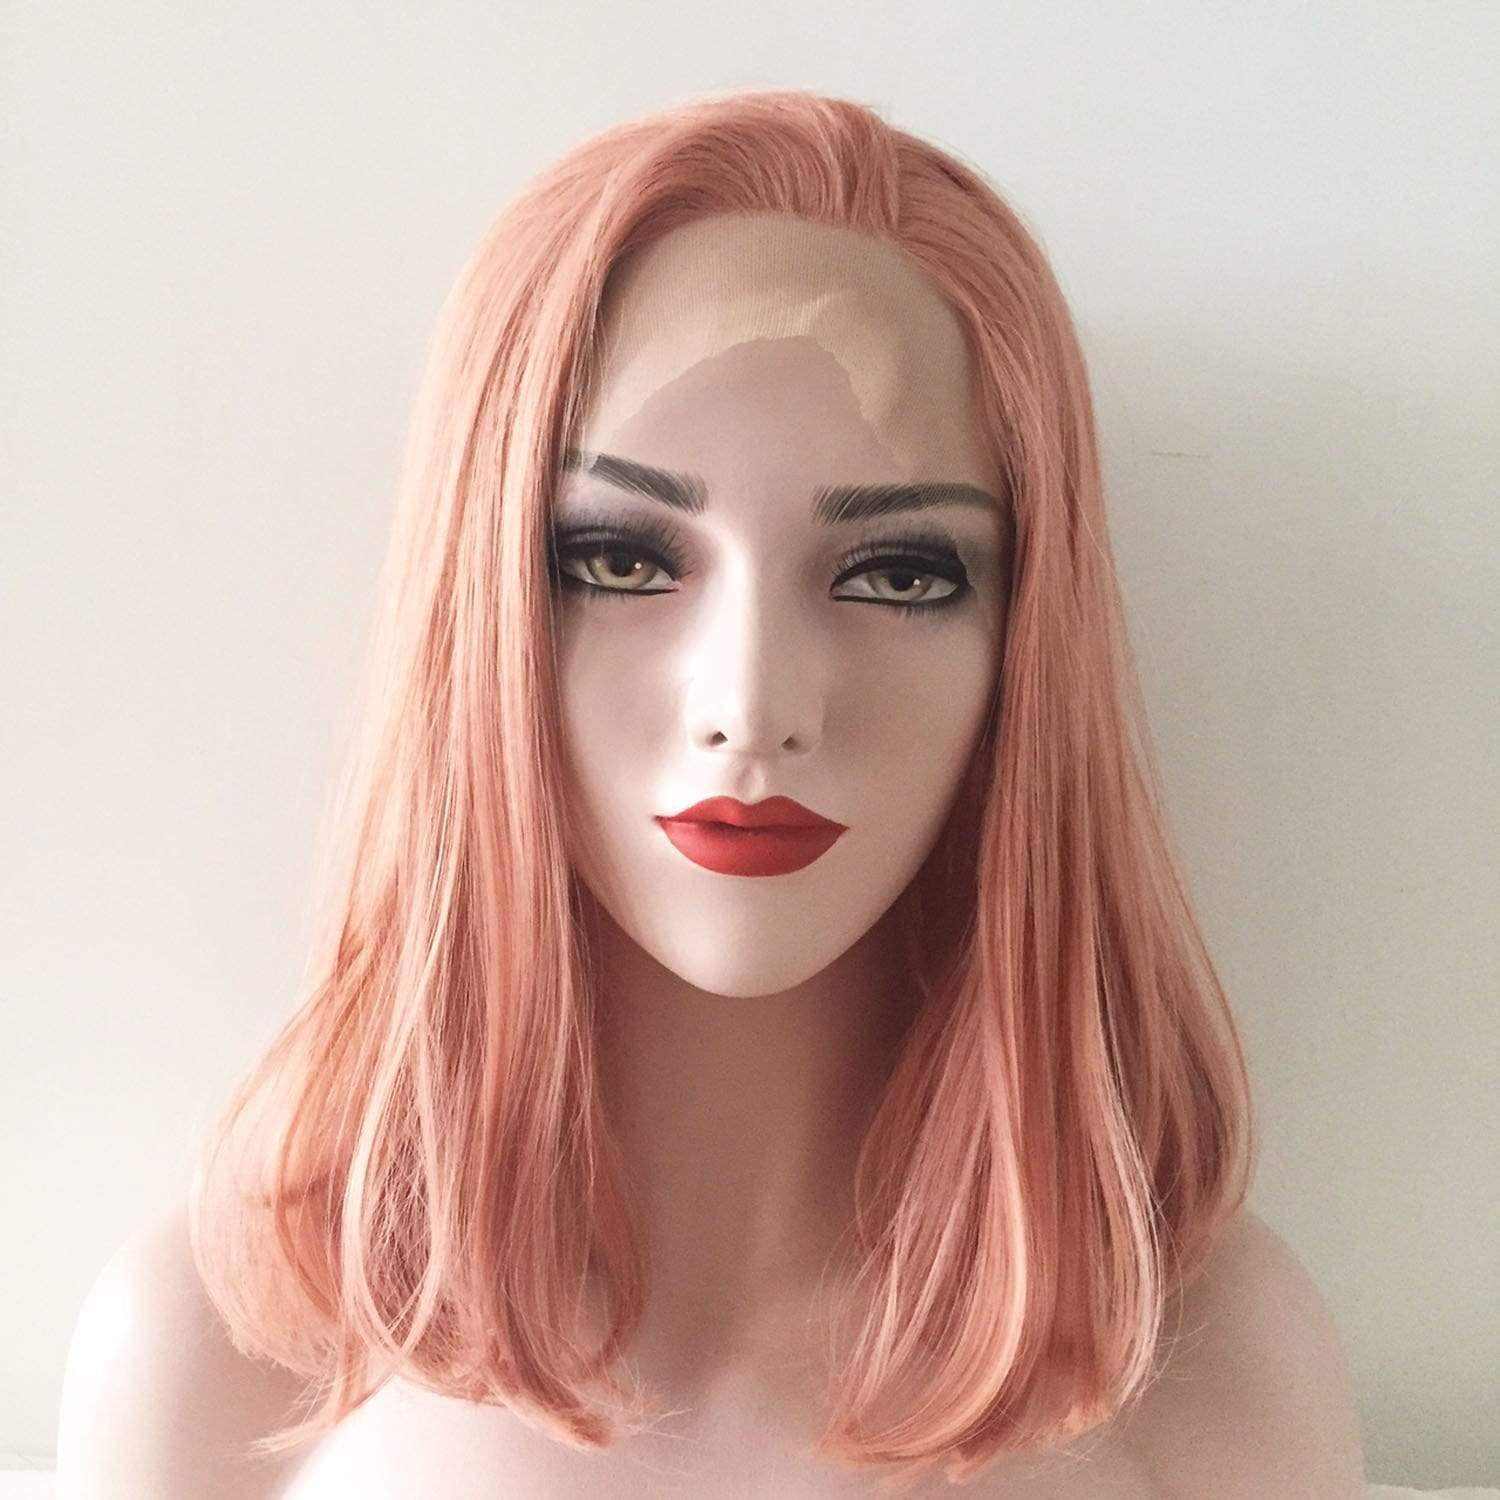 nevermindyrhead Women Lace Front Pink Side Part Shoulder Length Long Straight Hair Wig